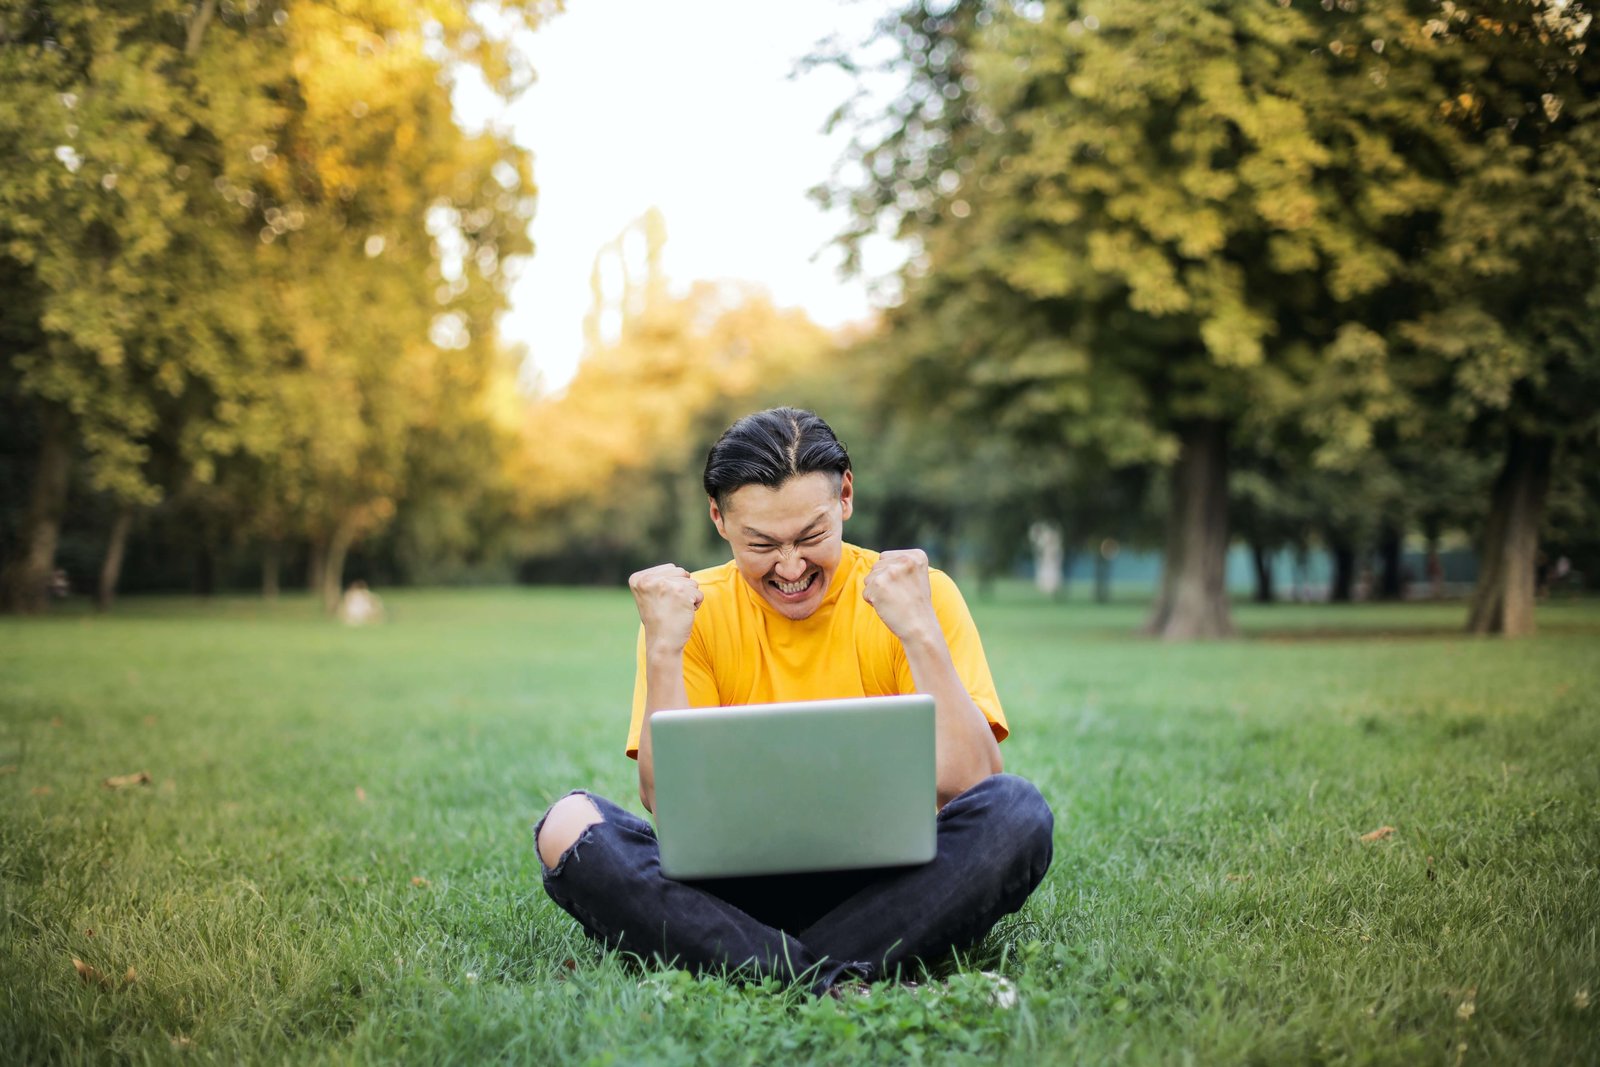 man sat down on grass with laptop with hands in a fist. He seems happy.